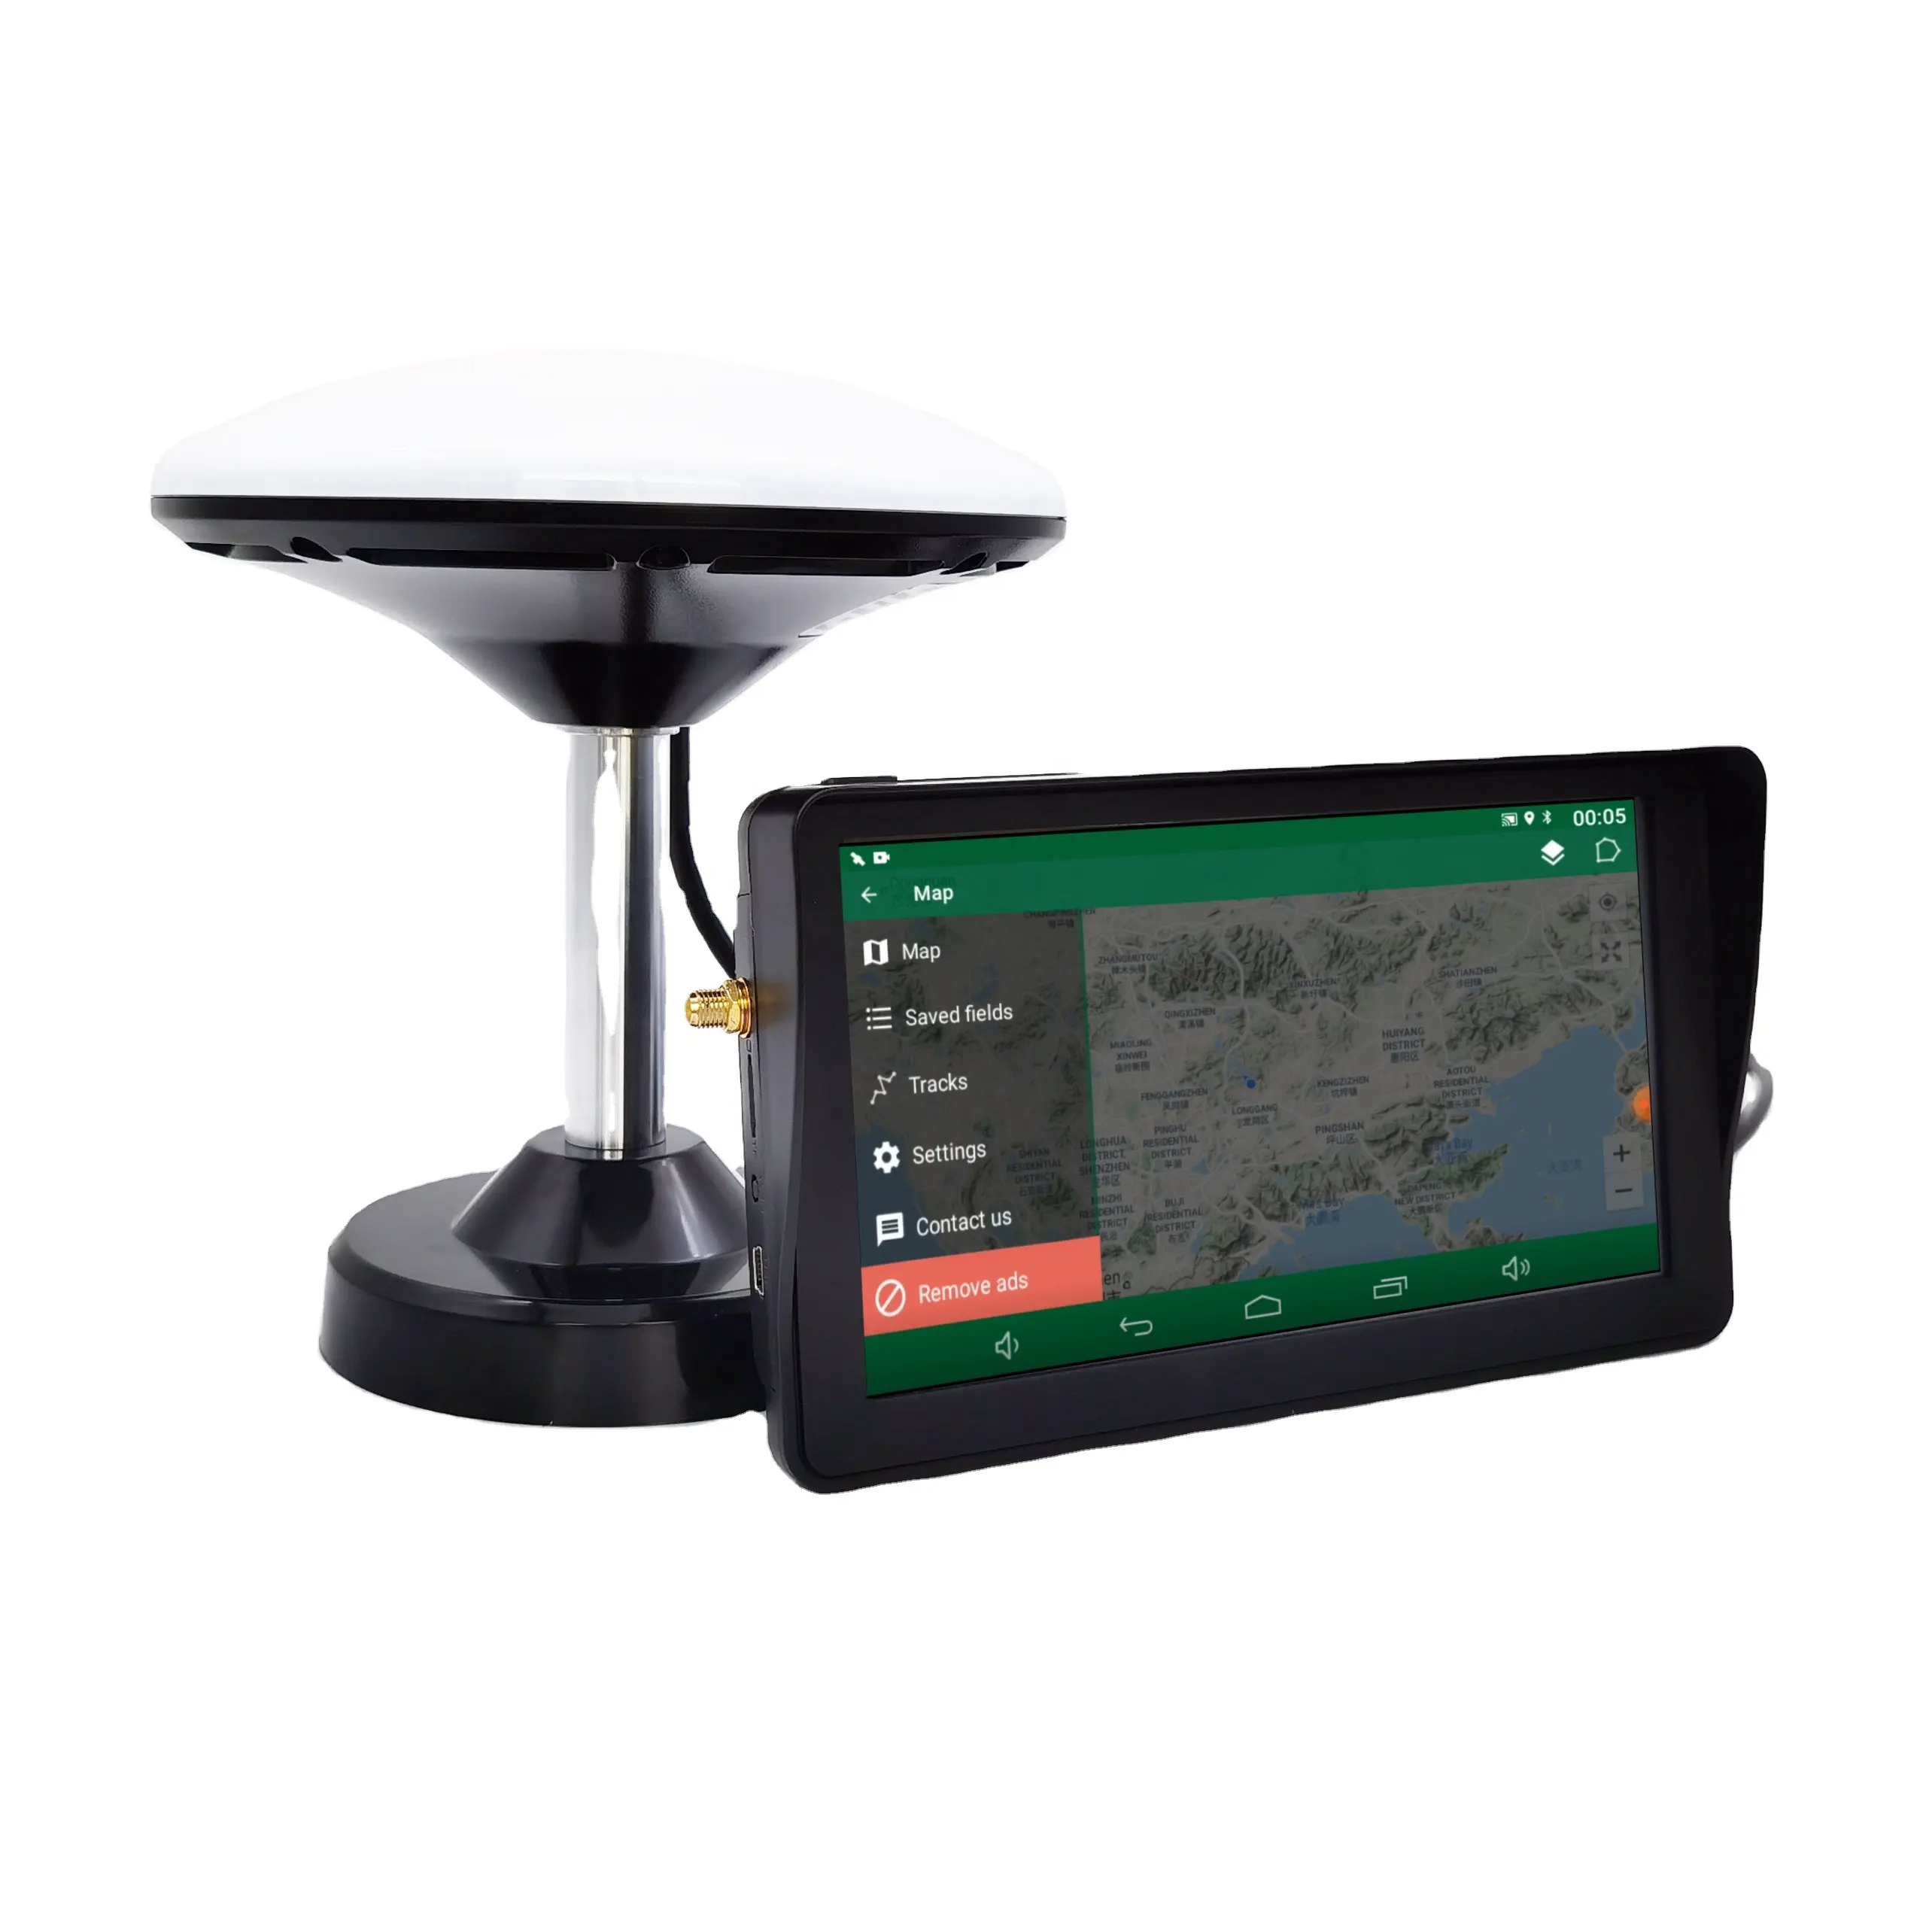 RICOEL Best Sale 7 inch Agri Farm Sprayer Agricultural GPS Field Navigation Guidance System for Tractors